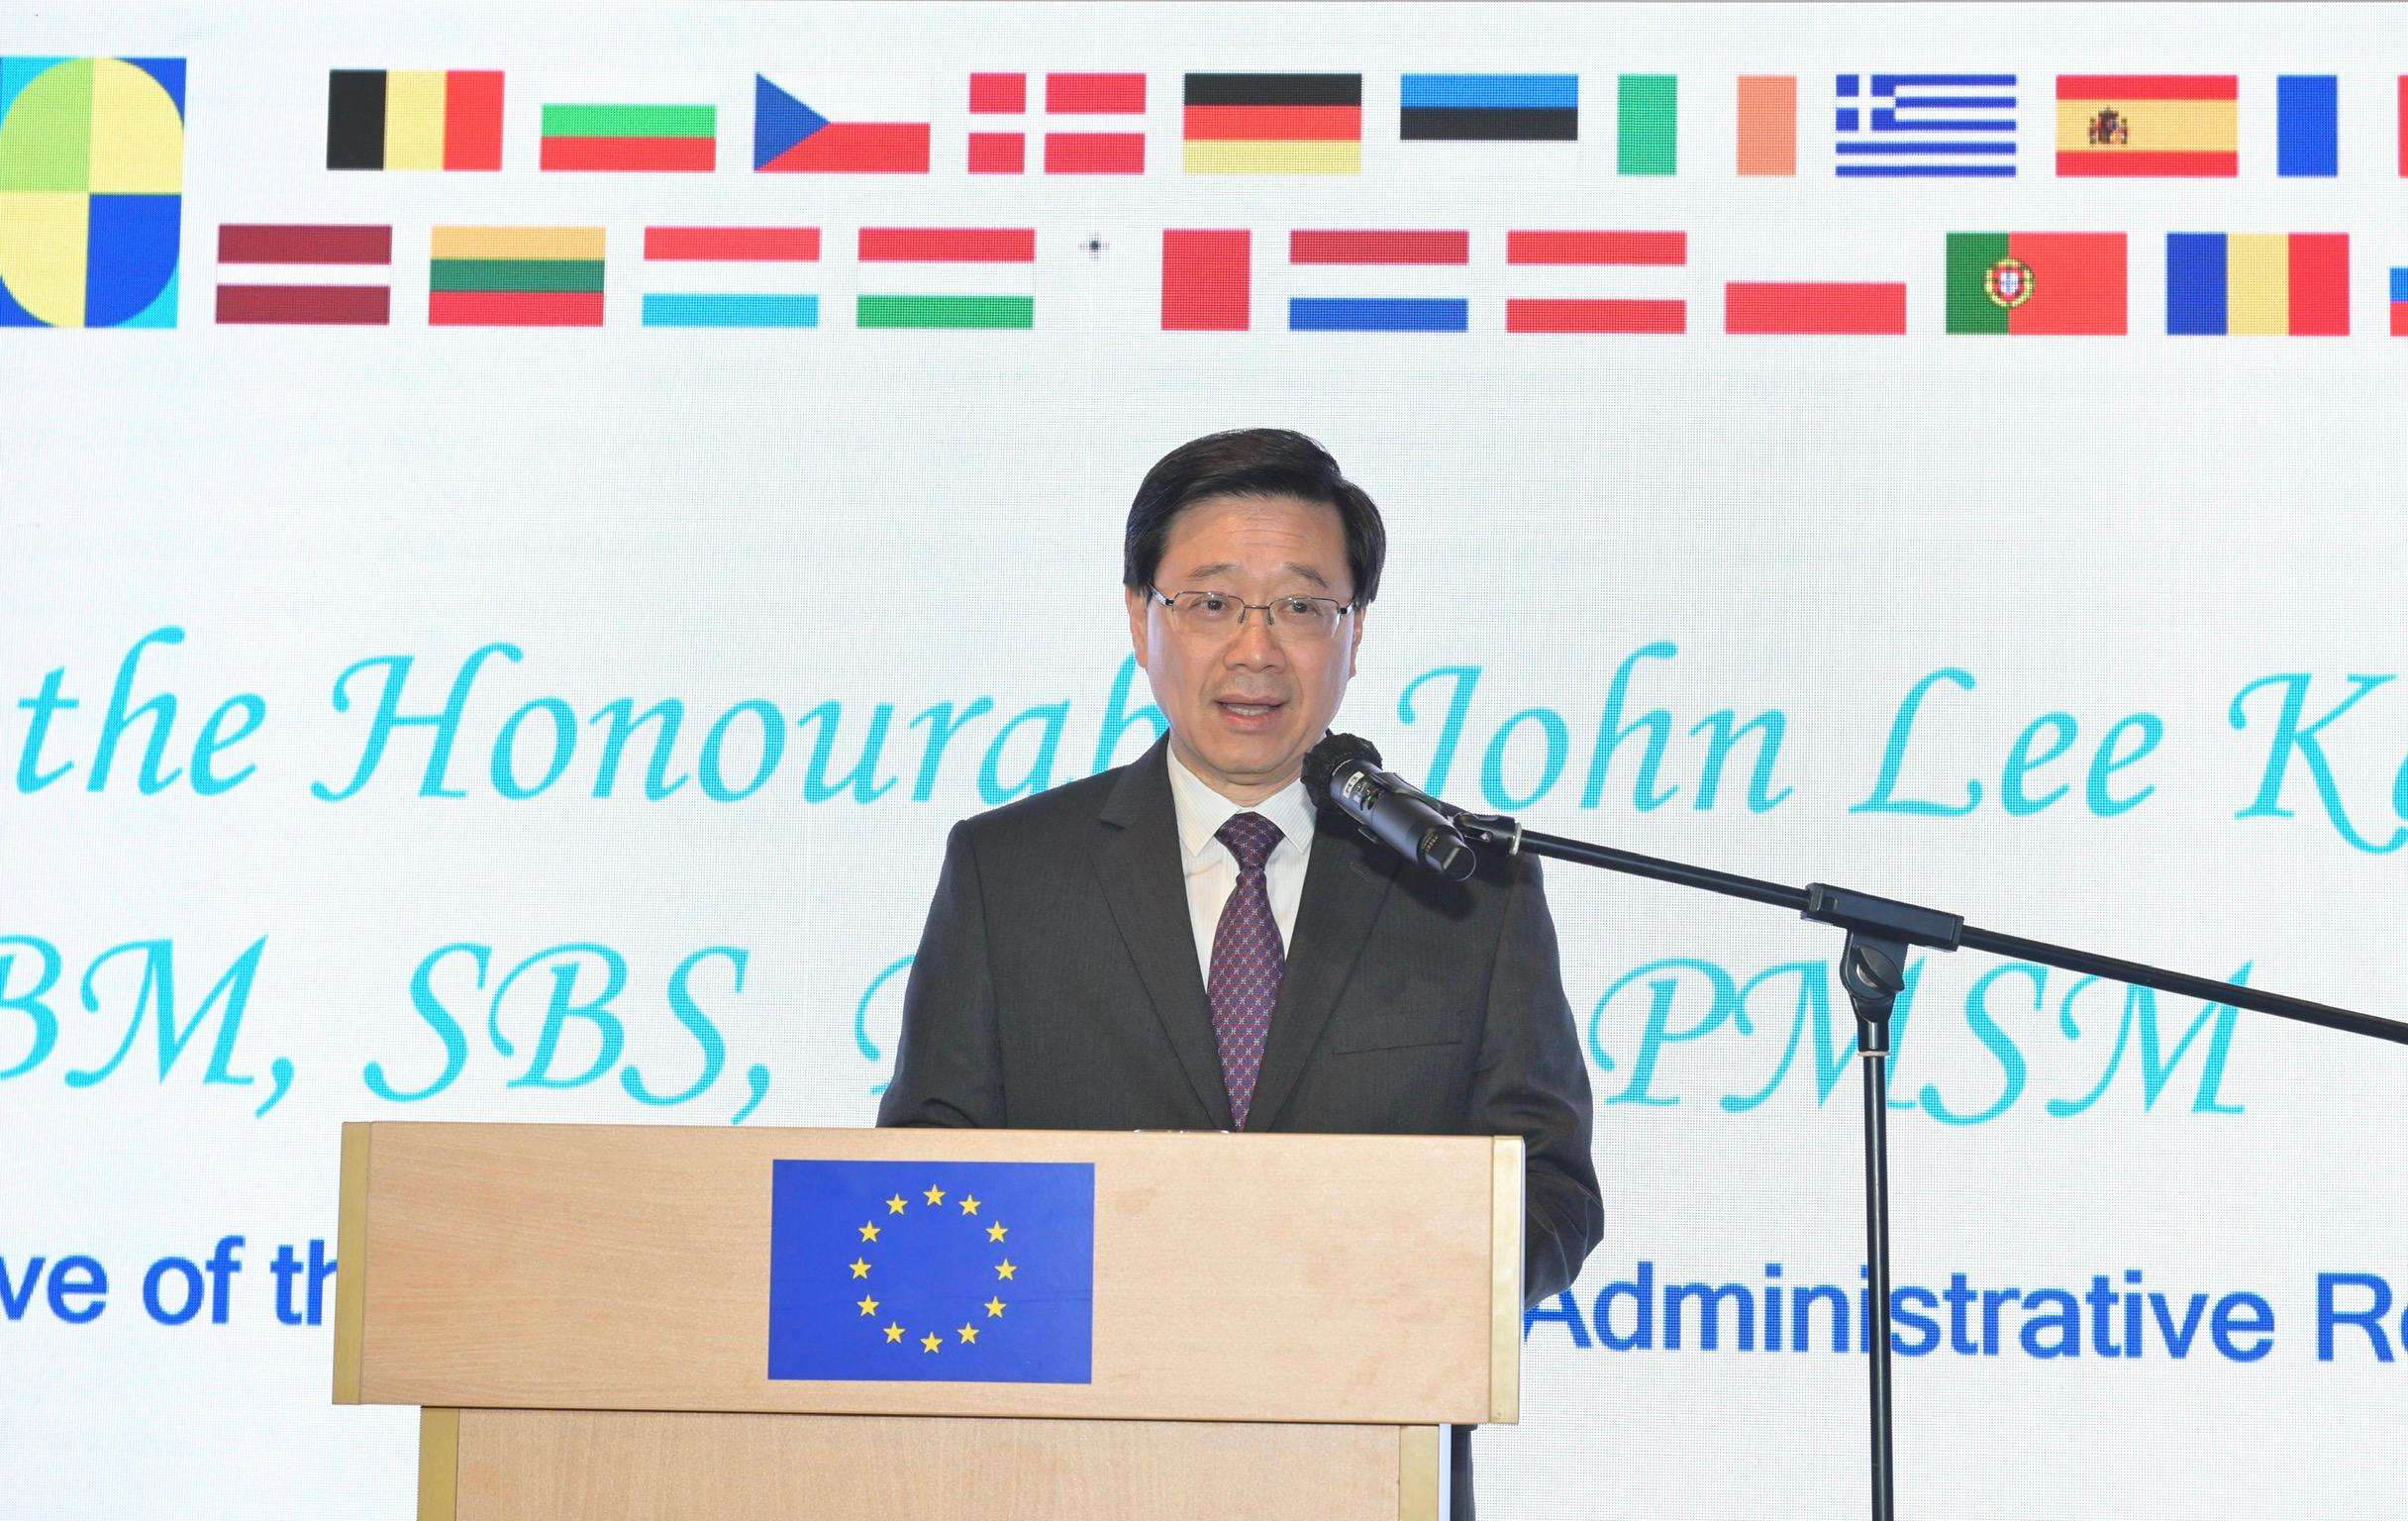 The Chief Executive, Mr John Lee, speaks at the Europe Day Reception today (May 9).